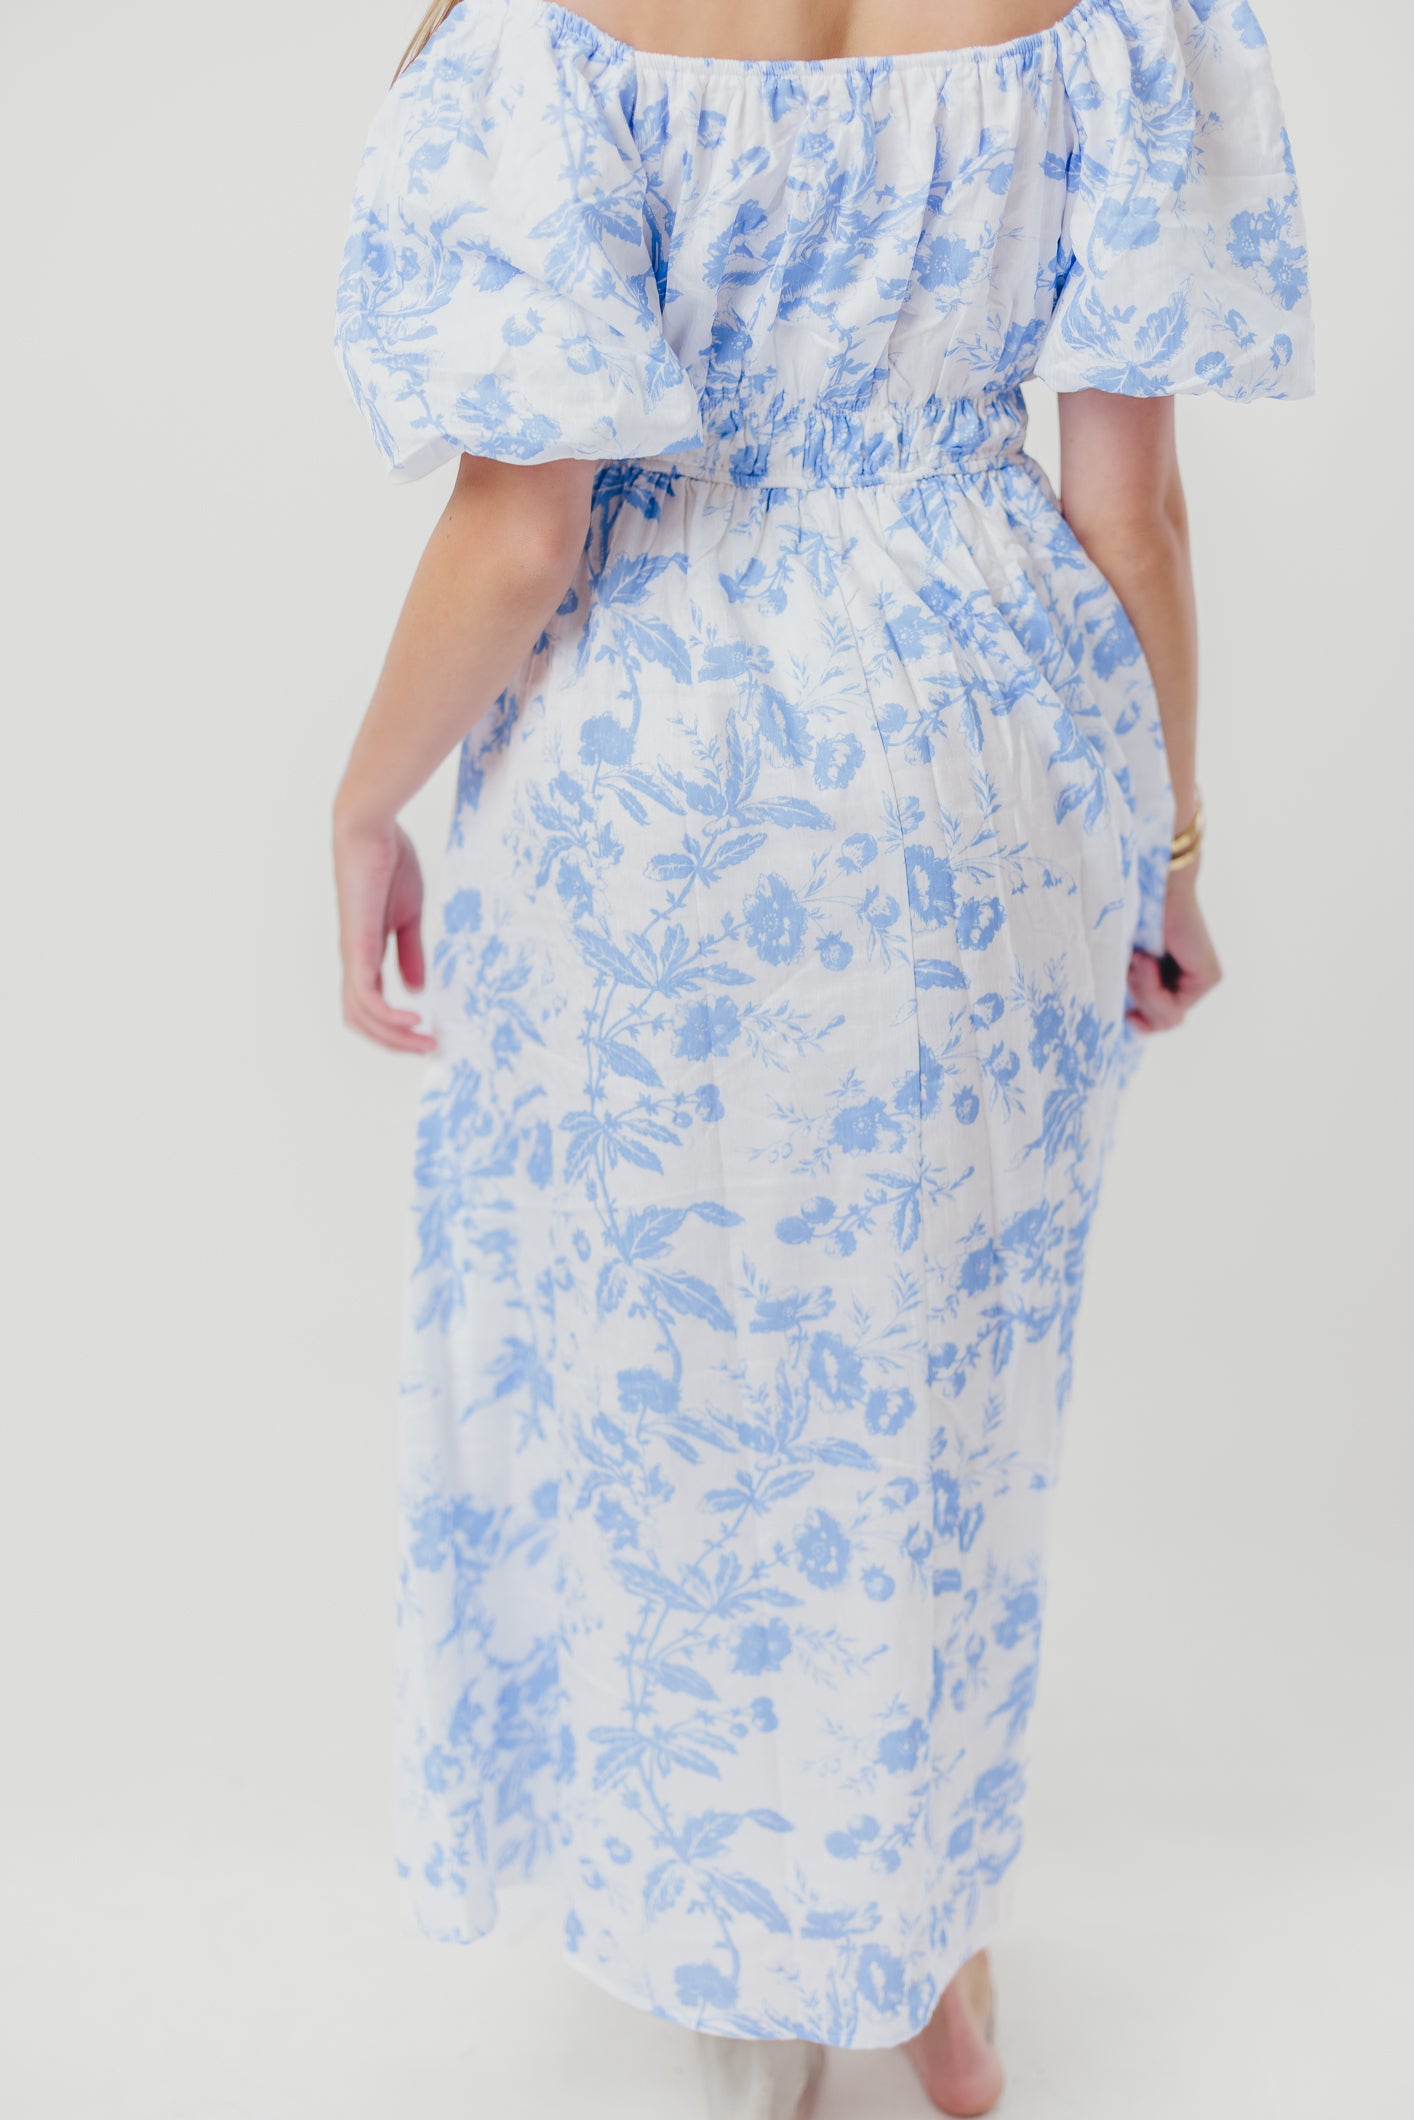 Mallory Textured Print Midi Dress in Blue Floral